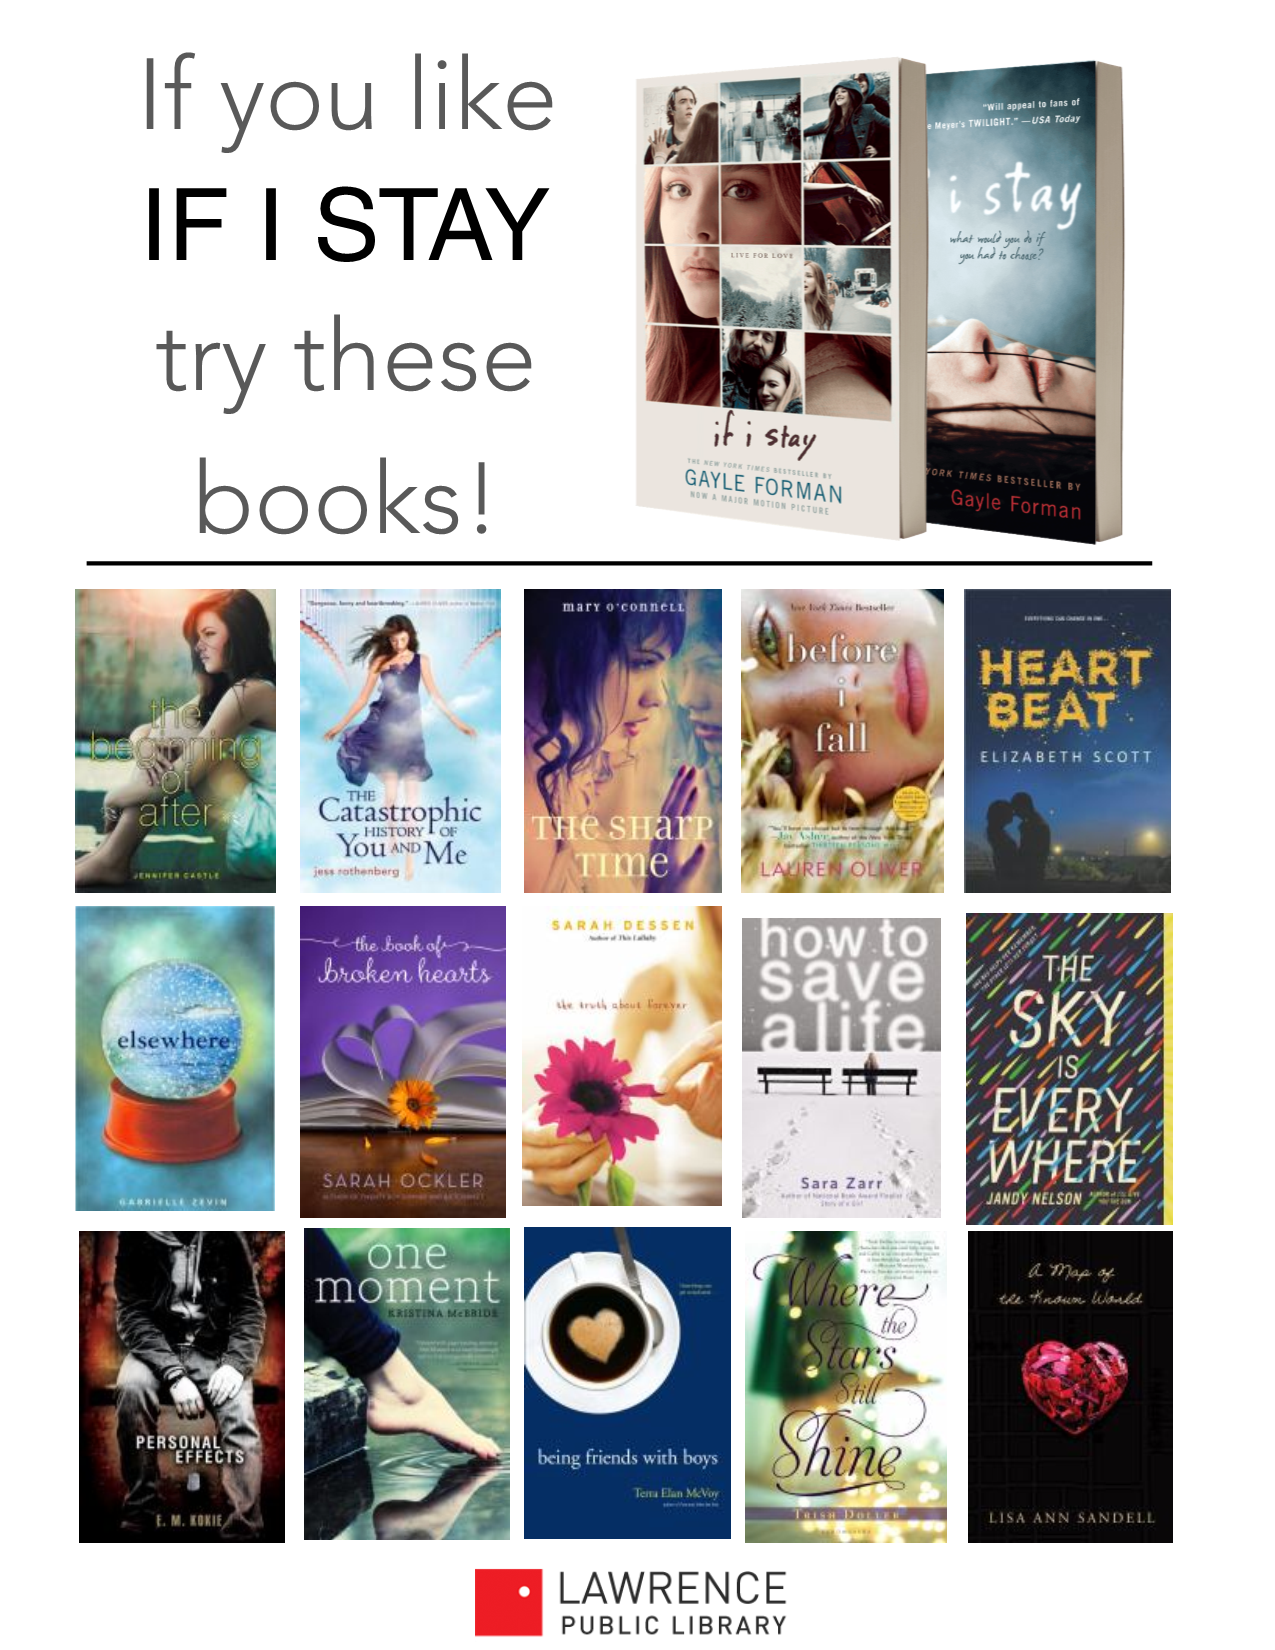 15 Young Adult Novels for Fans of IF I STAY by Gayle Forman wrapped